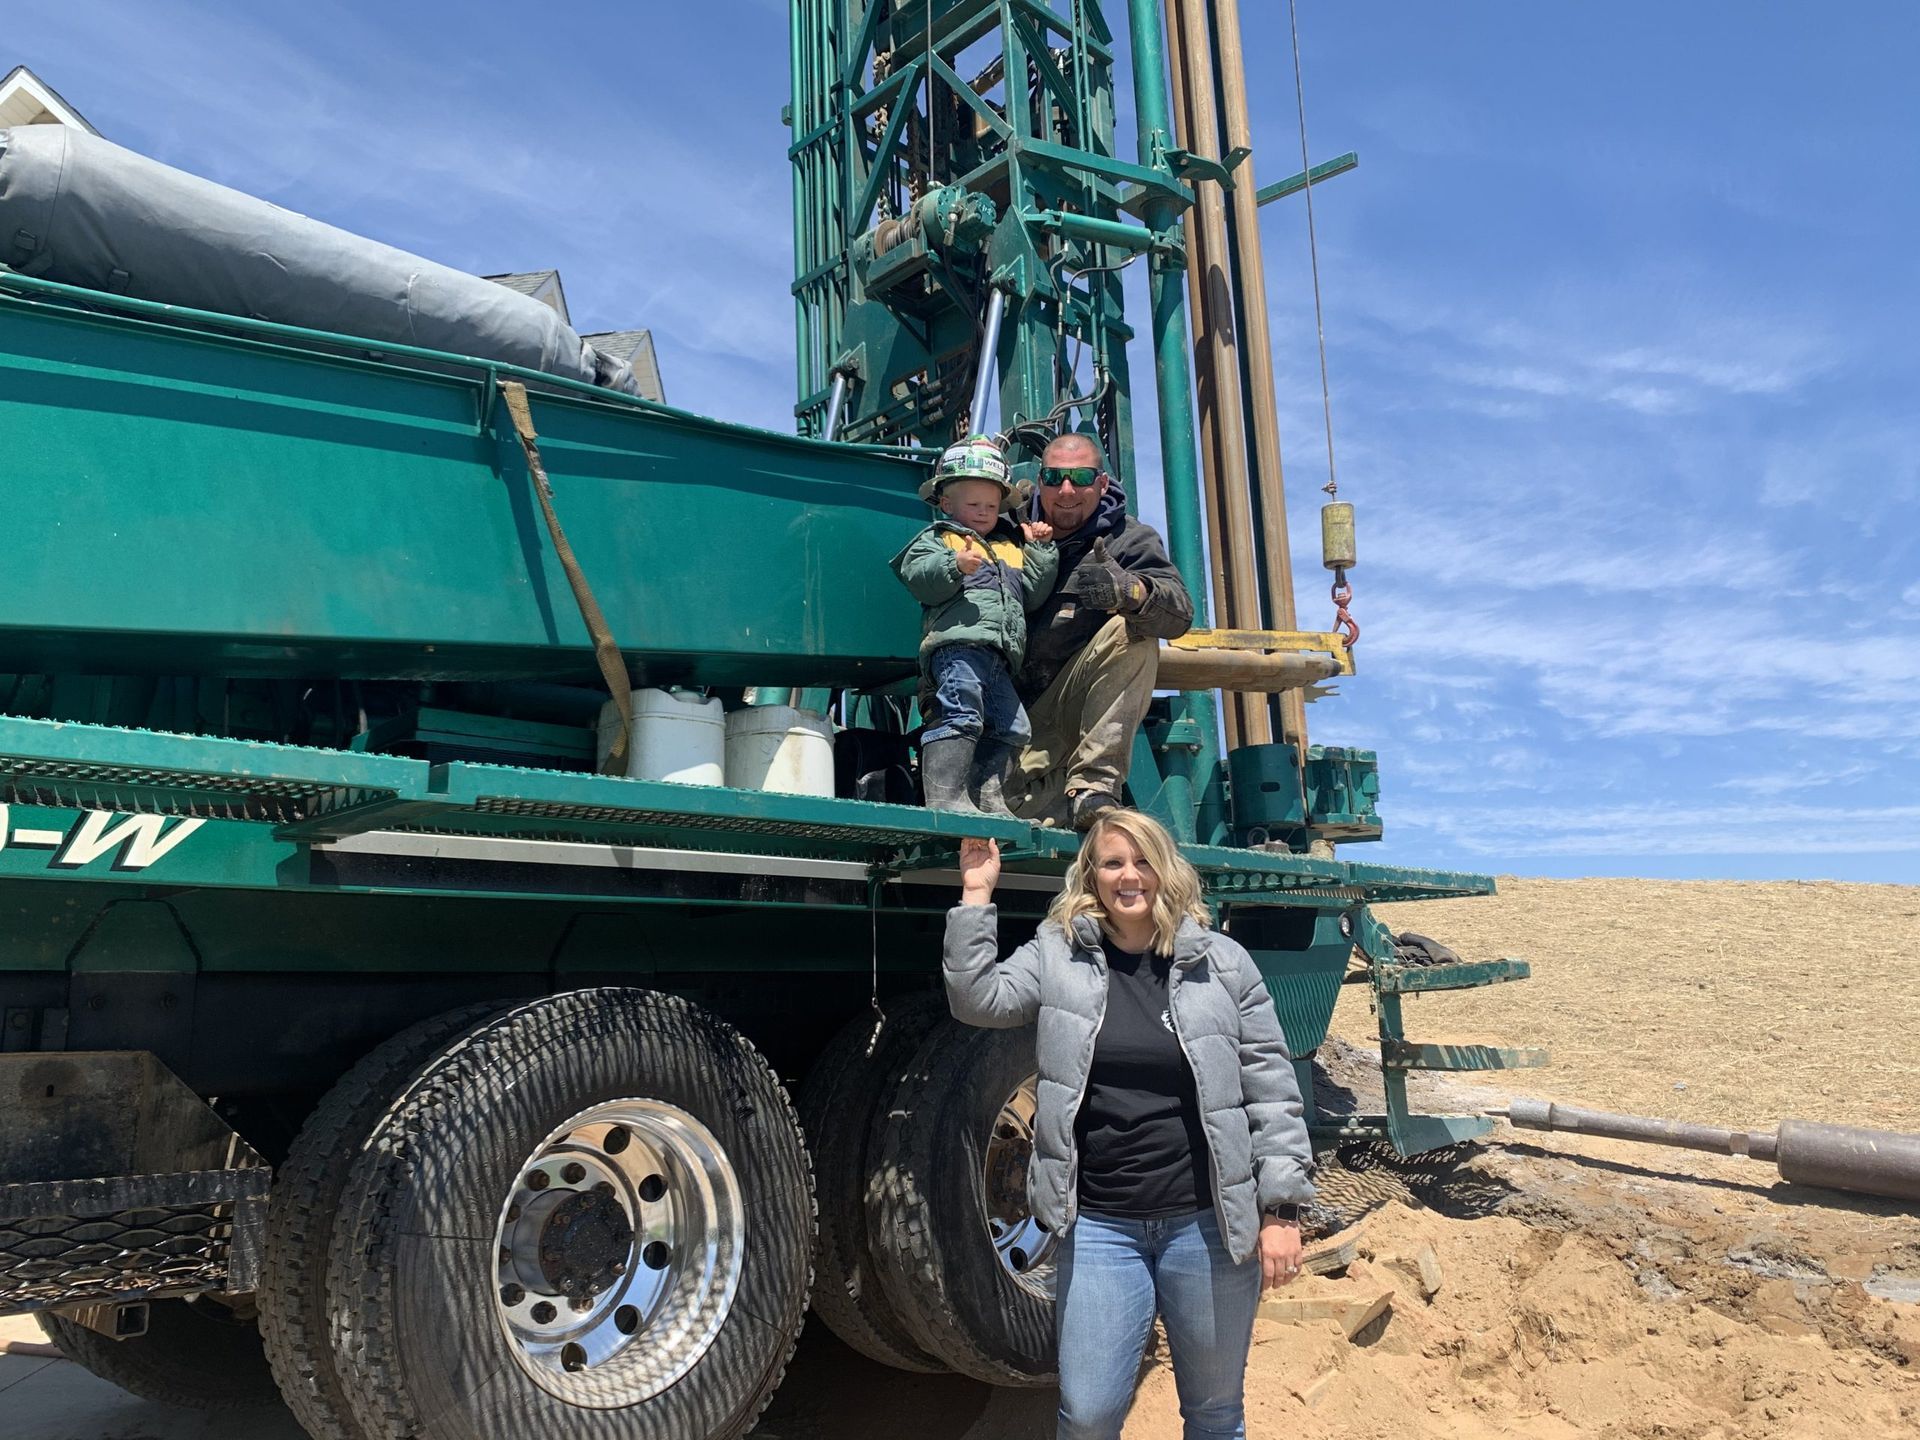 Appalachian Well Drilling owner and family